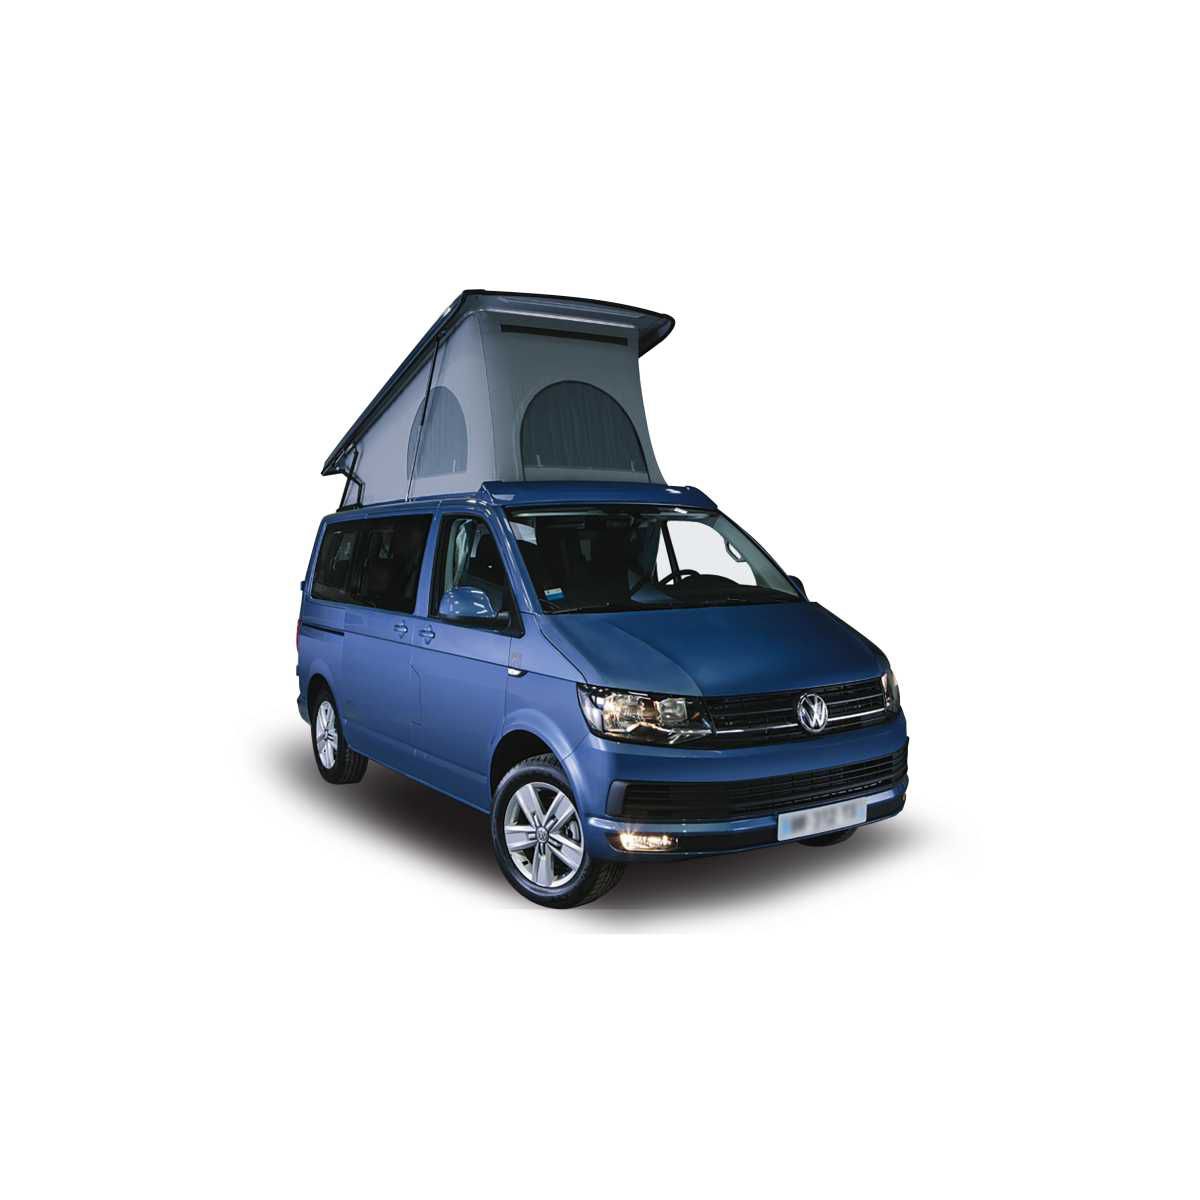 CLAIRVAL Thermomatte THERMICAMP Roof VW T5 T6 T6-1 California ab Bj- 06-2003 Art- Nr. LTMVW02